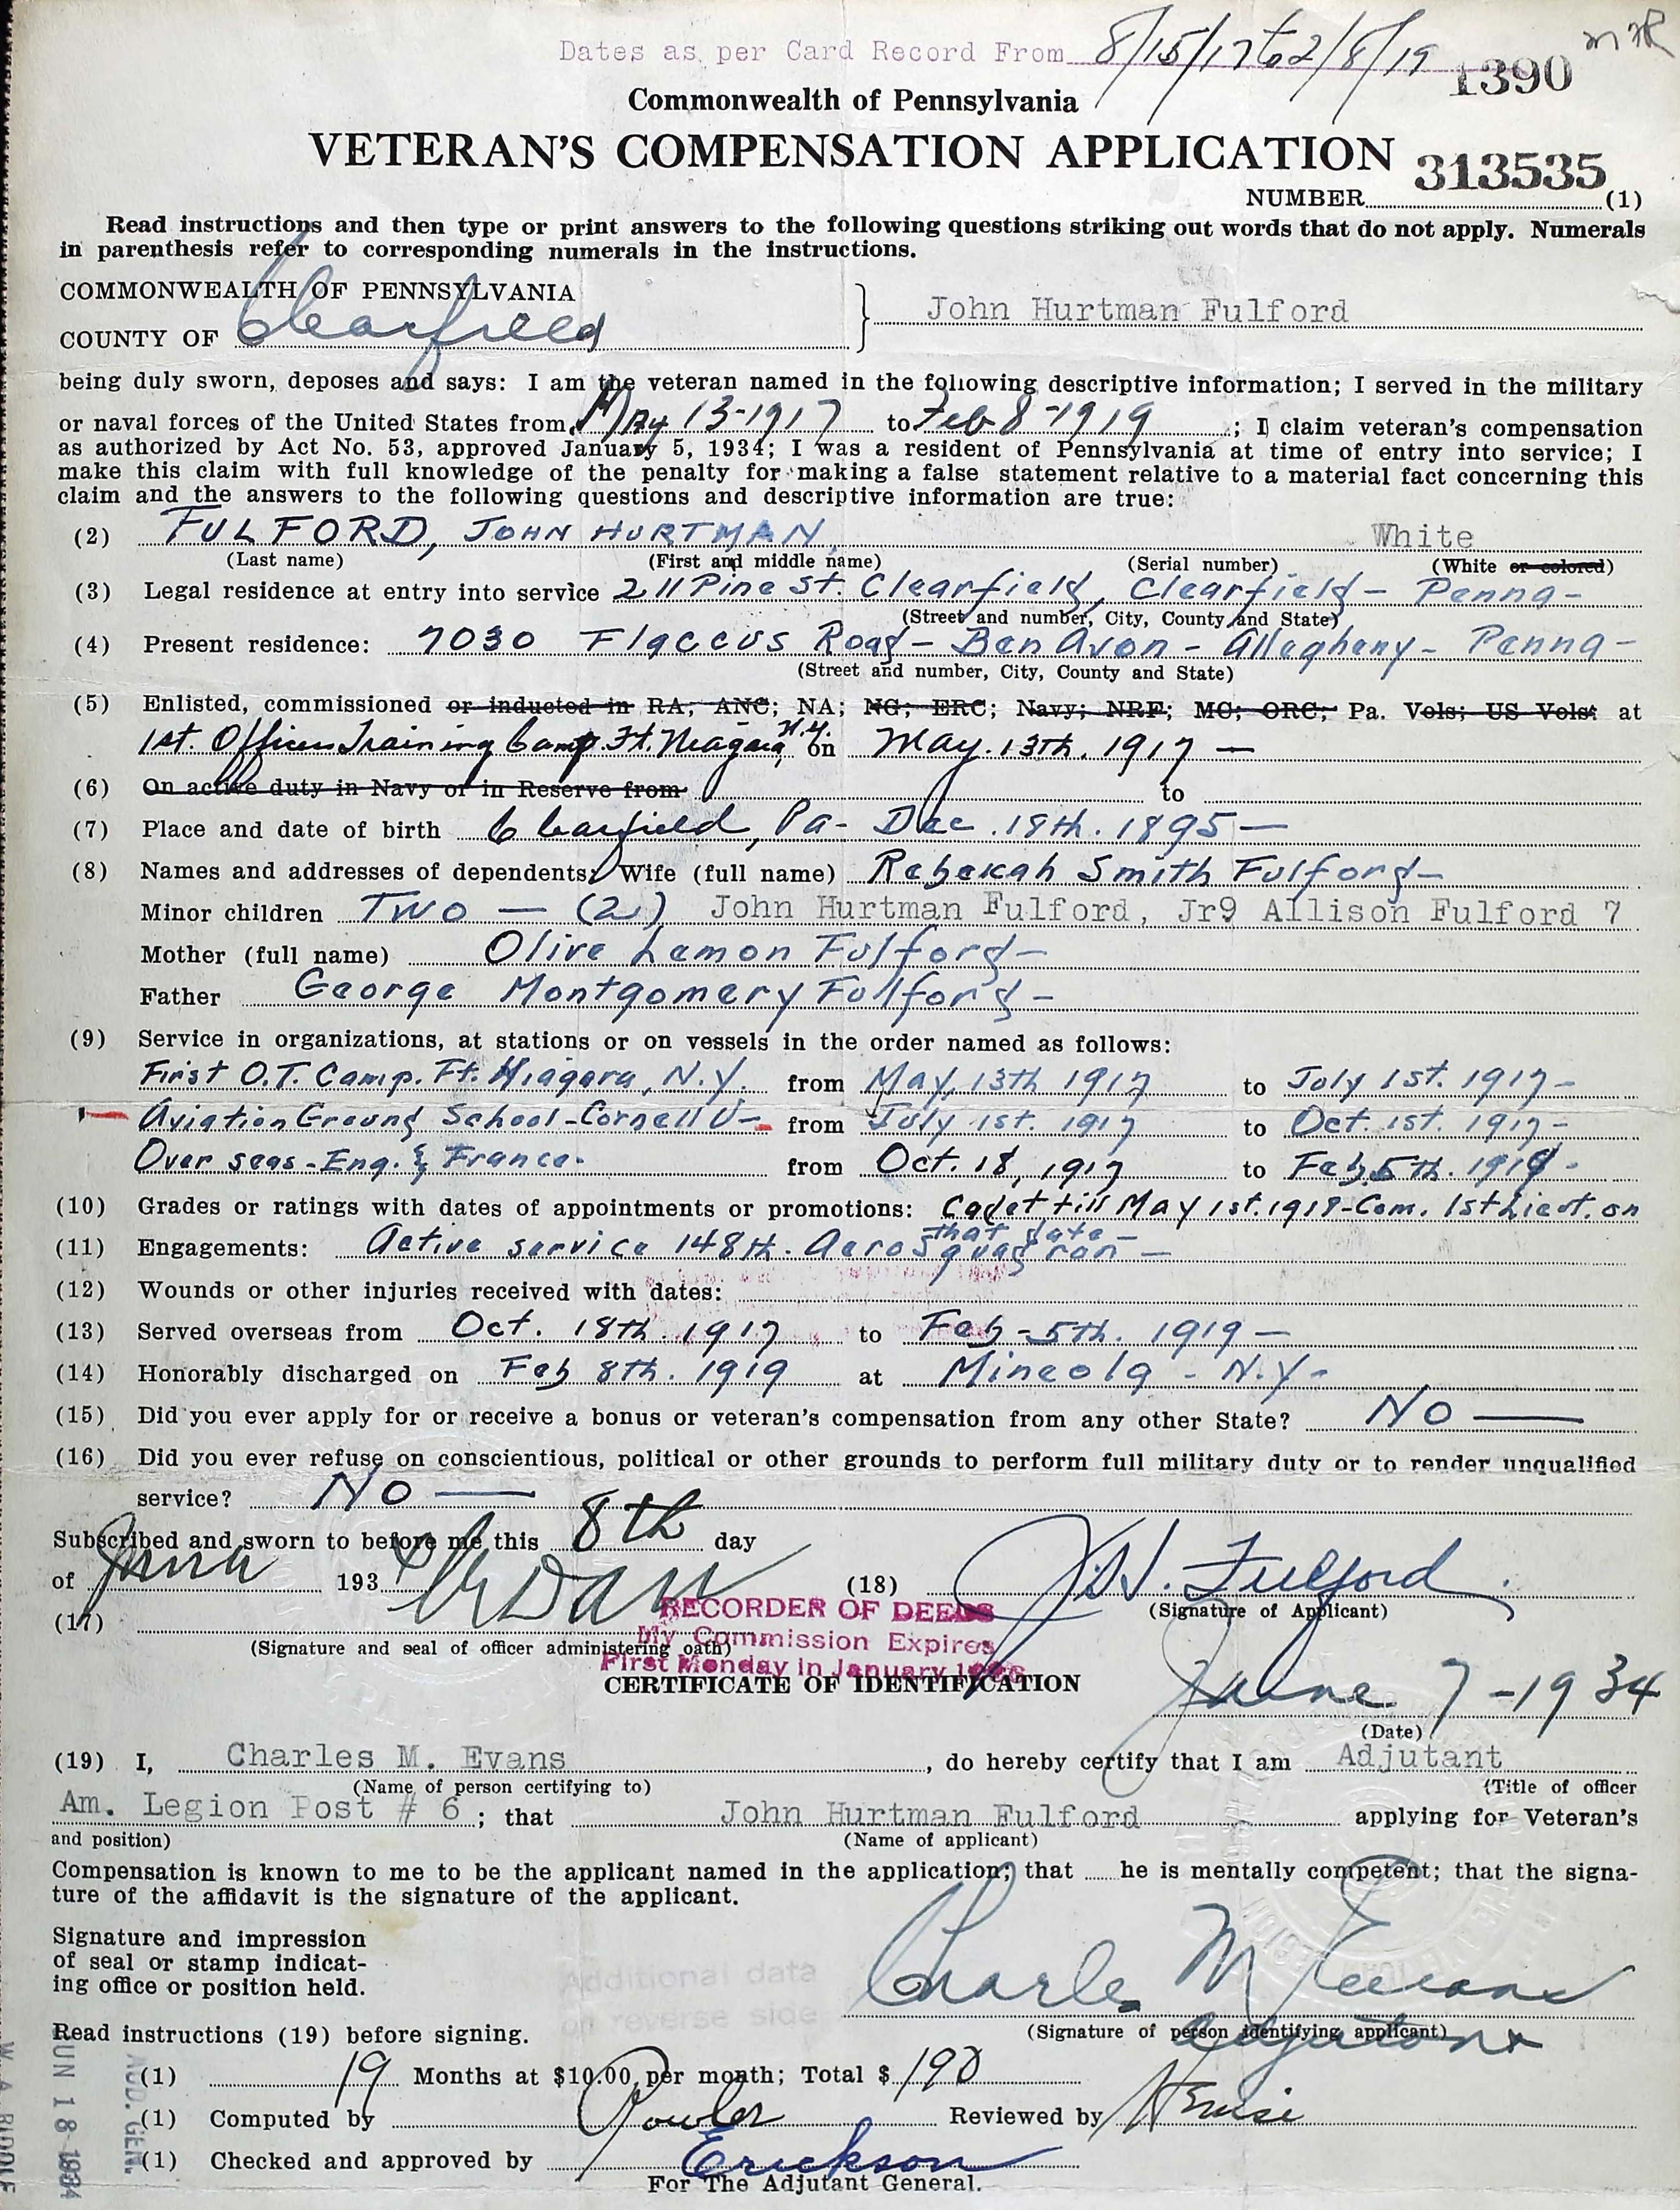 A form titled "Commonwealth of Pennsylvania Veteran's Compensation Application" filled out by Fulford.